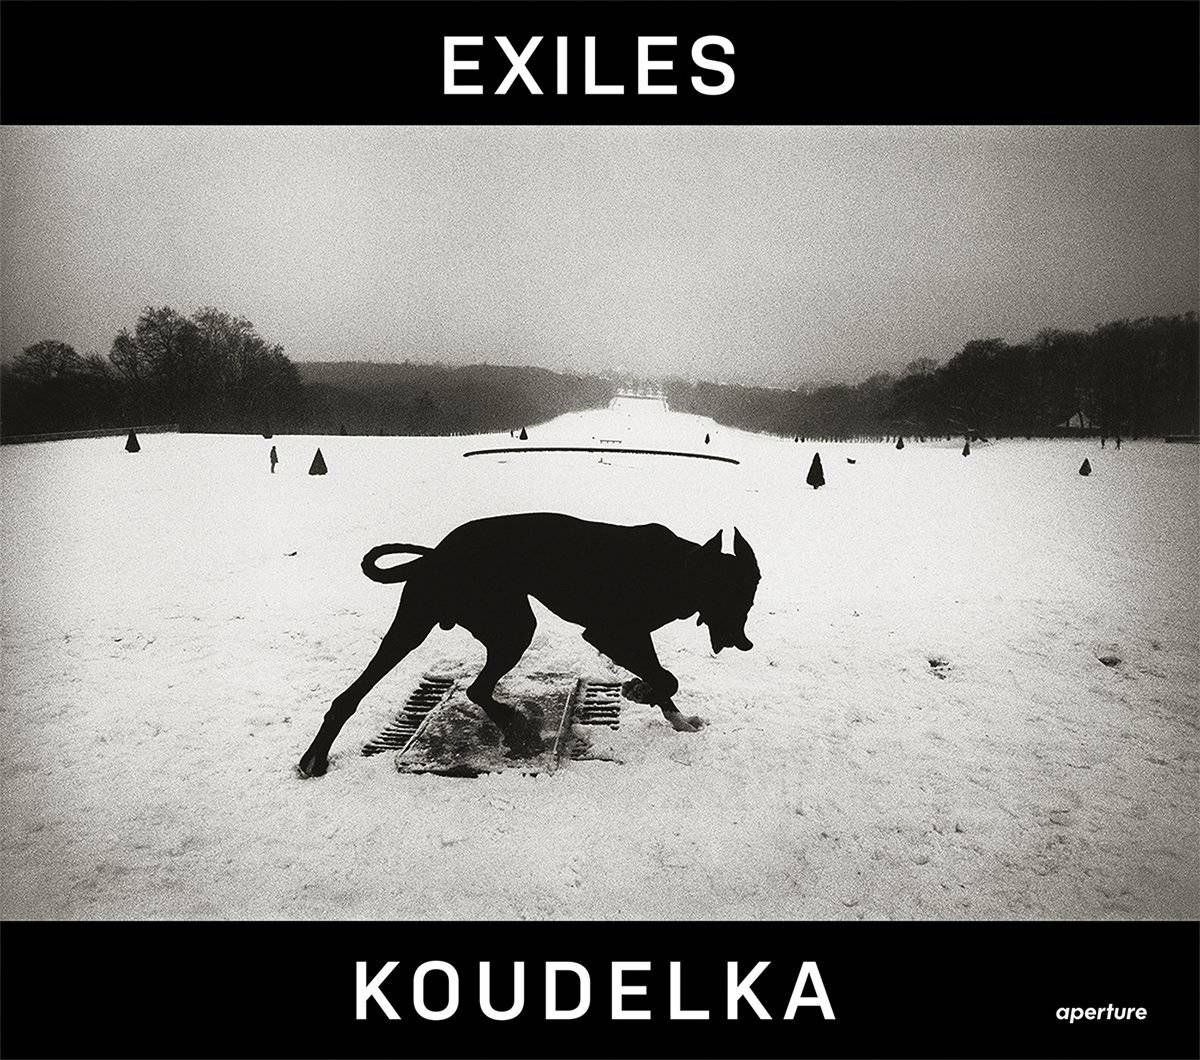 Must-Buy Books: “The Decisive Moment” by Henri Cartier-Bresson and “Exiles” by Josef Koudelka